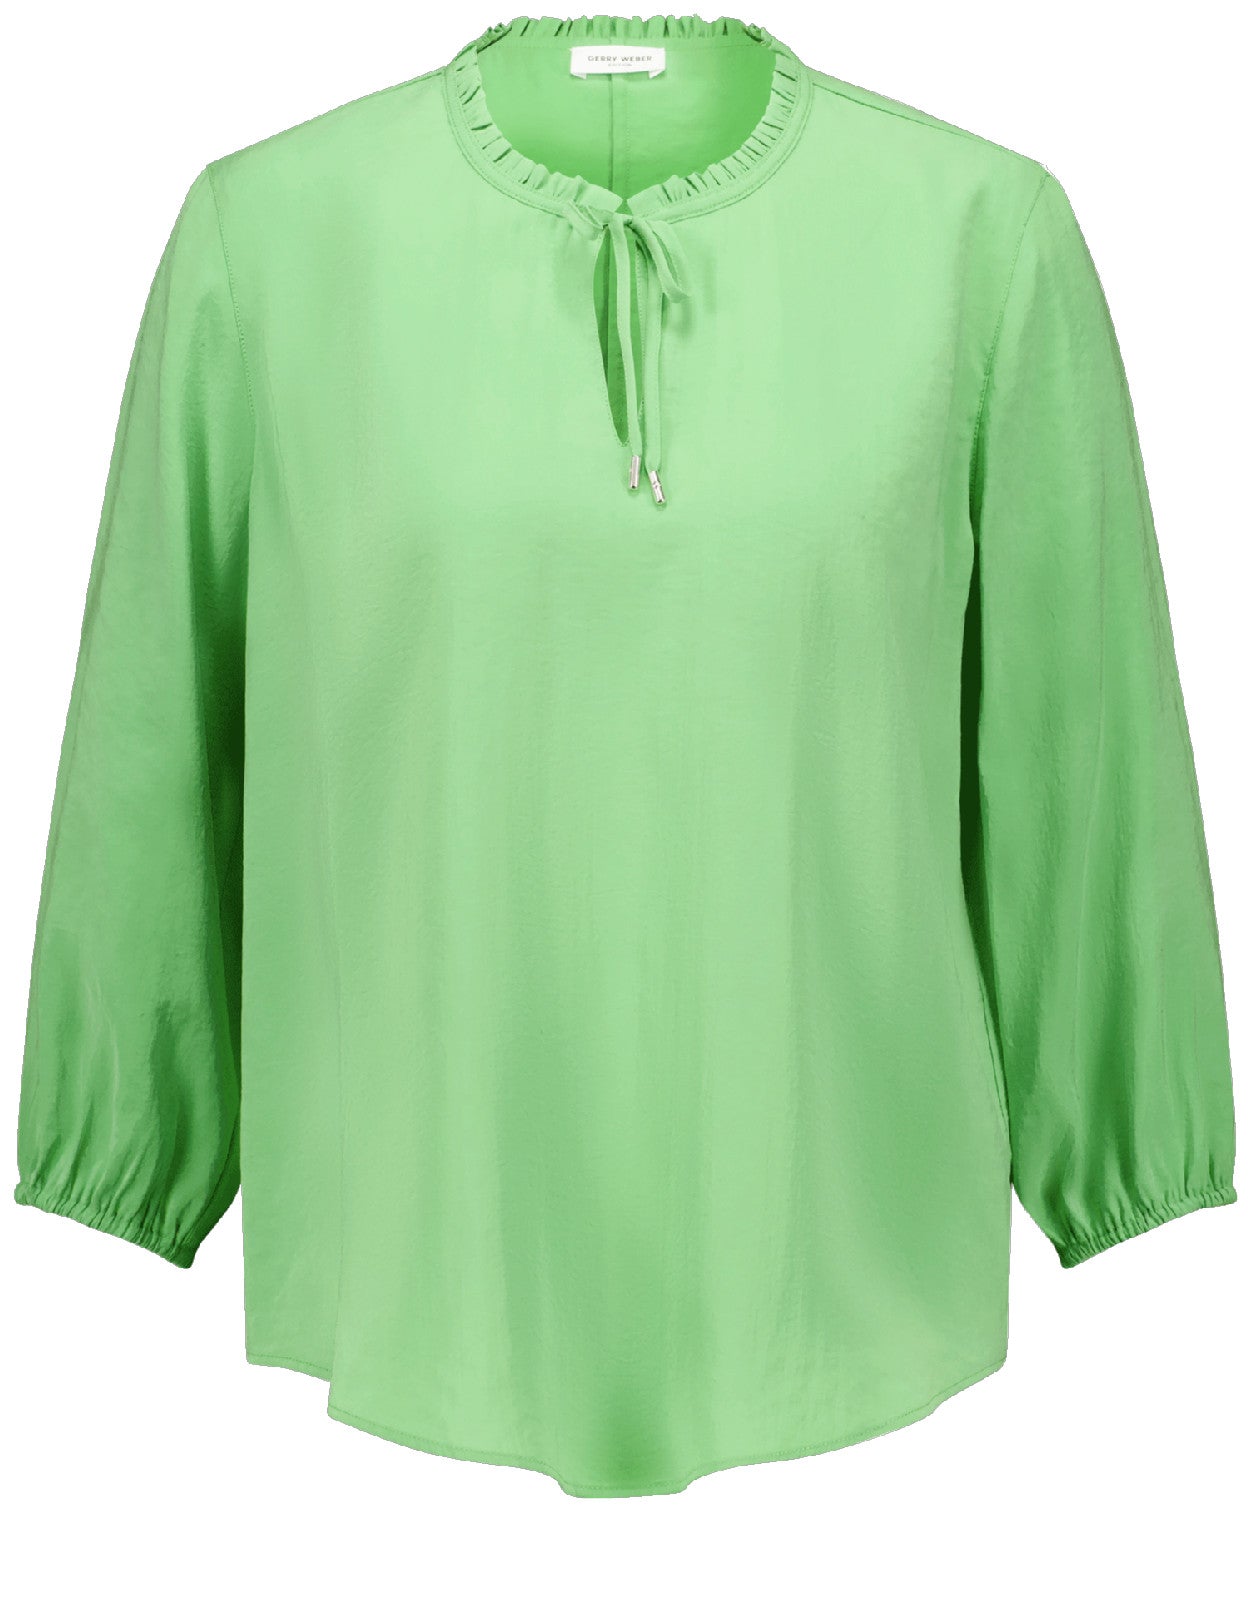 Gerry Weber Blouse in Bright Apple